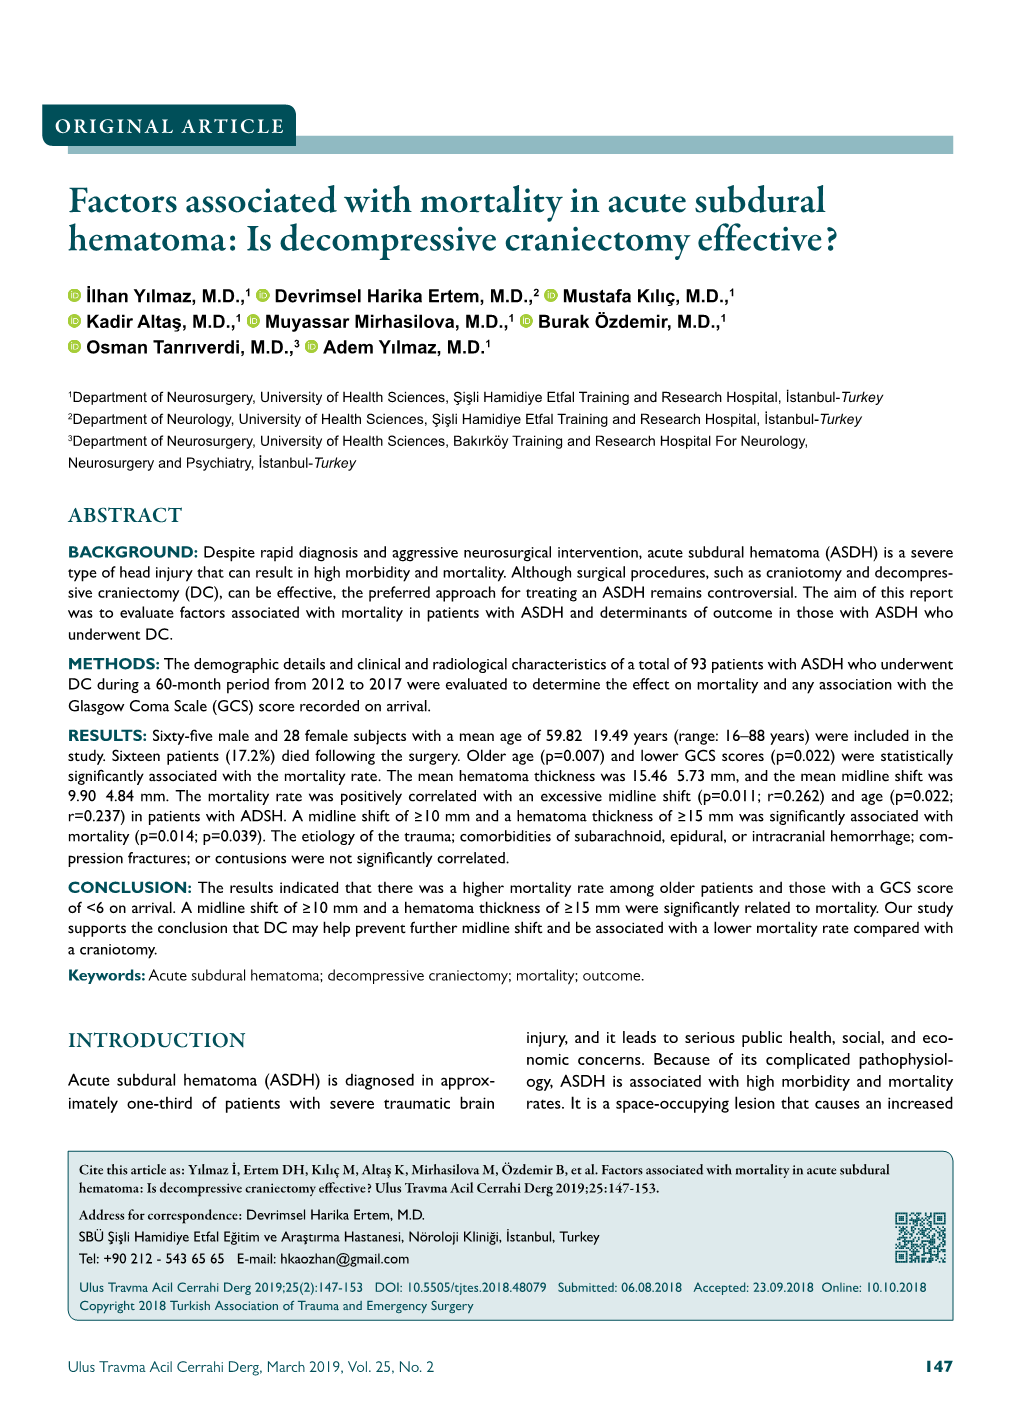 Factors Associated with Mortality in Acute Subdural Hematoma: Is Decompressive Craniectomy Effective?